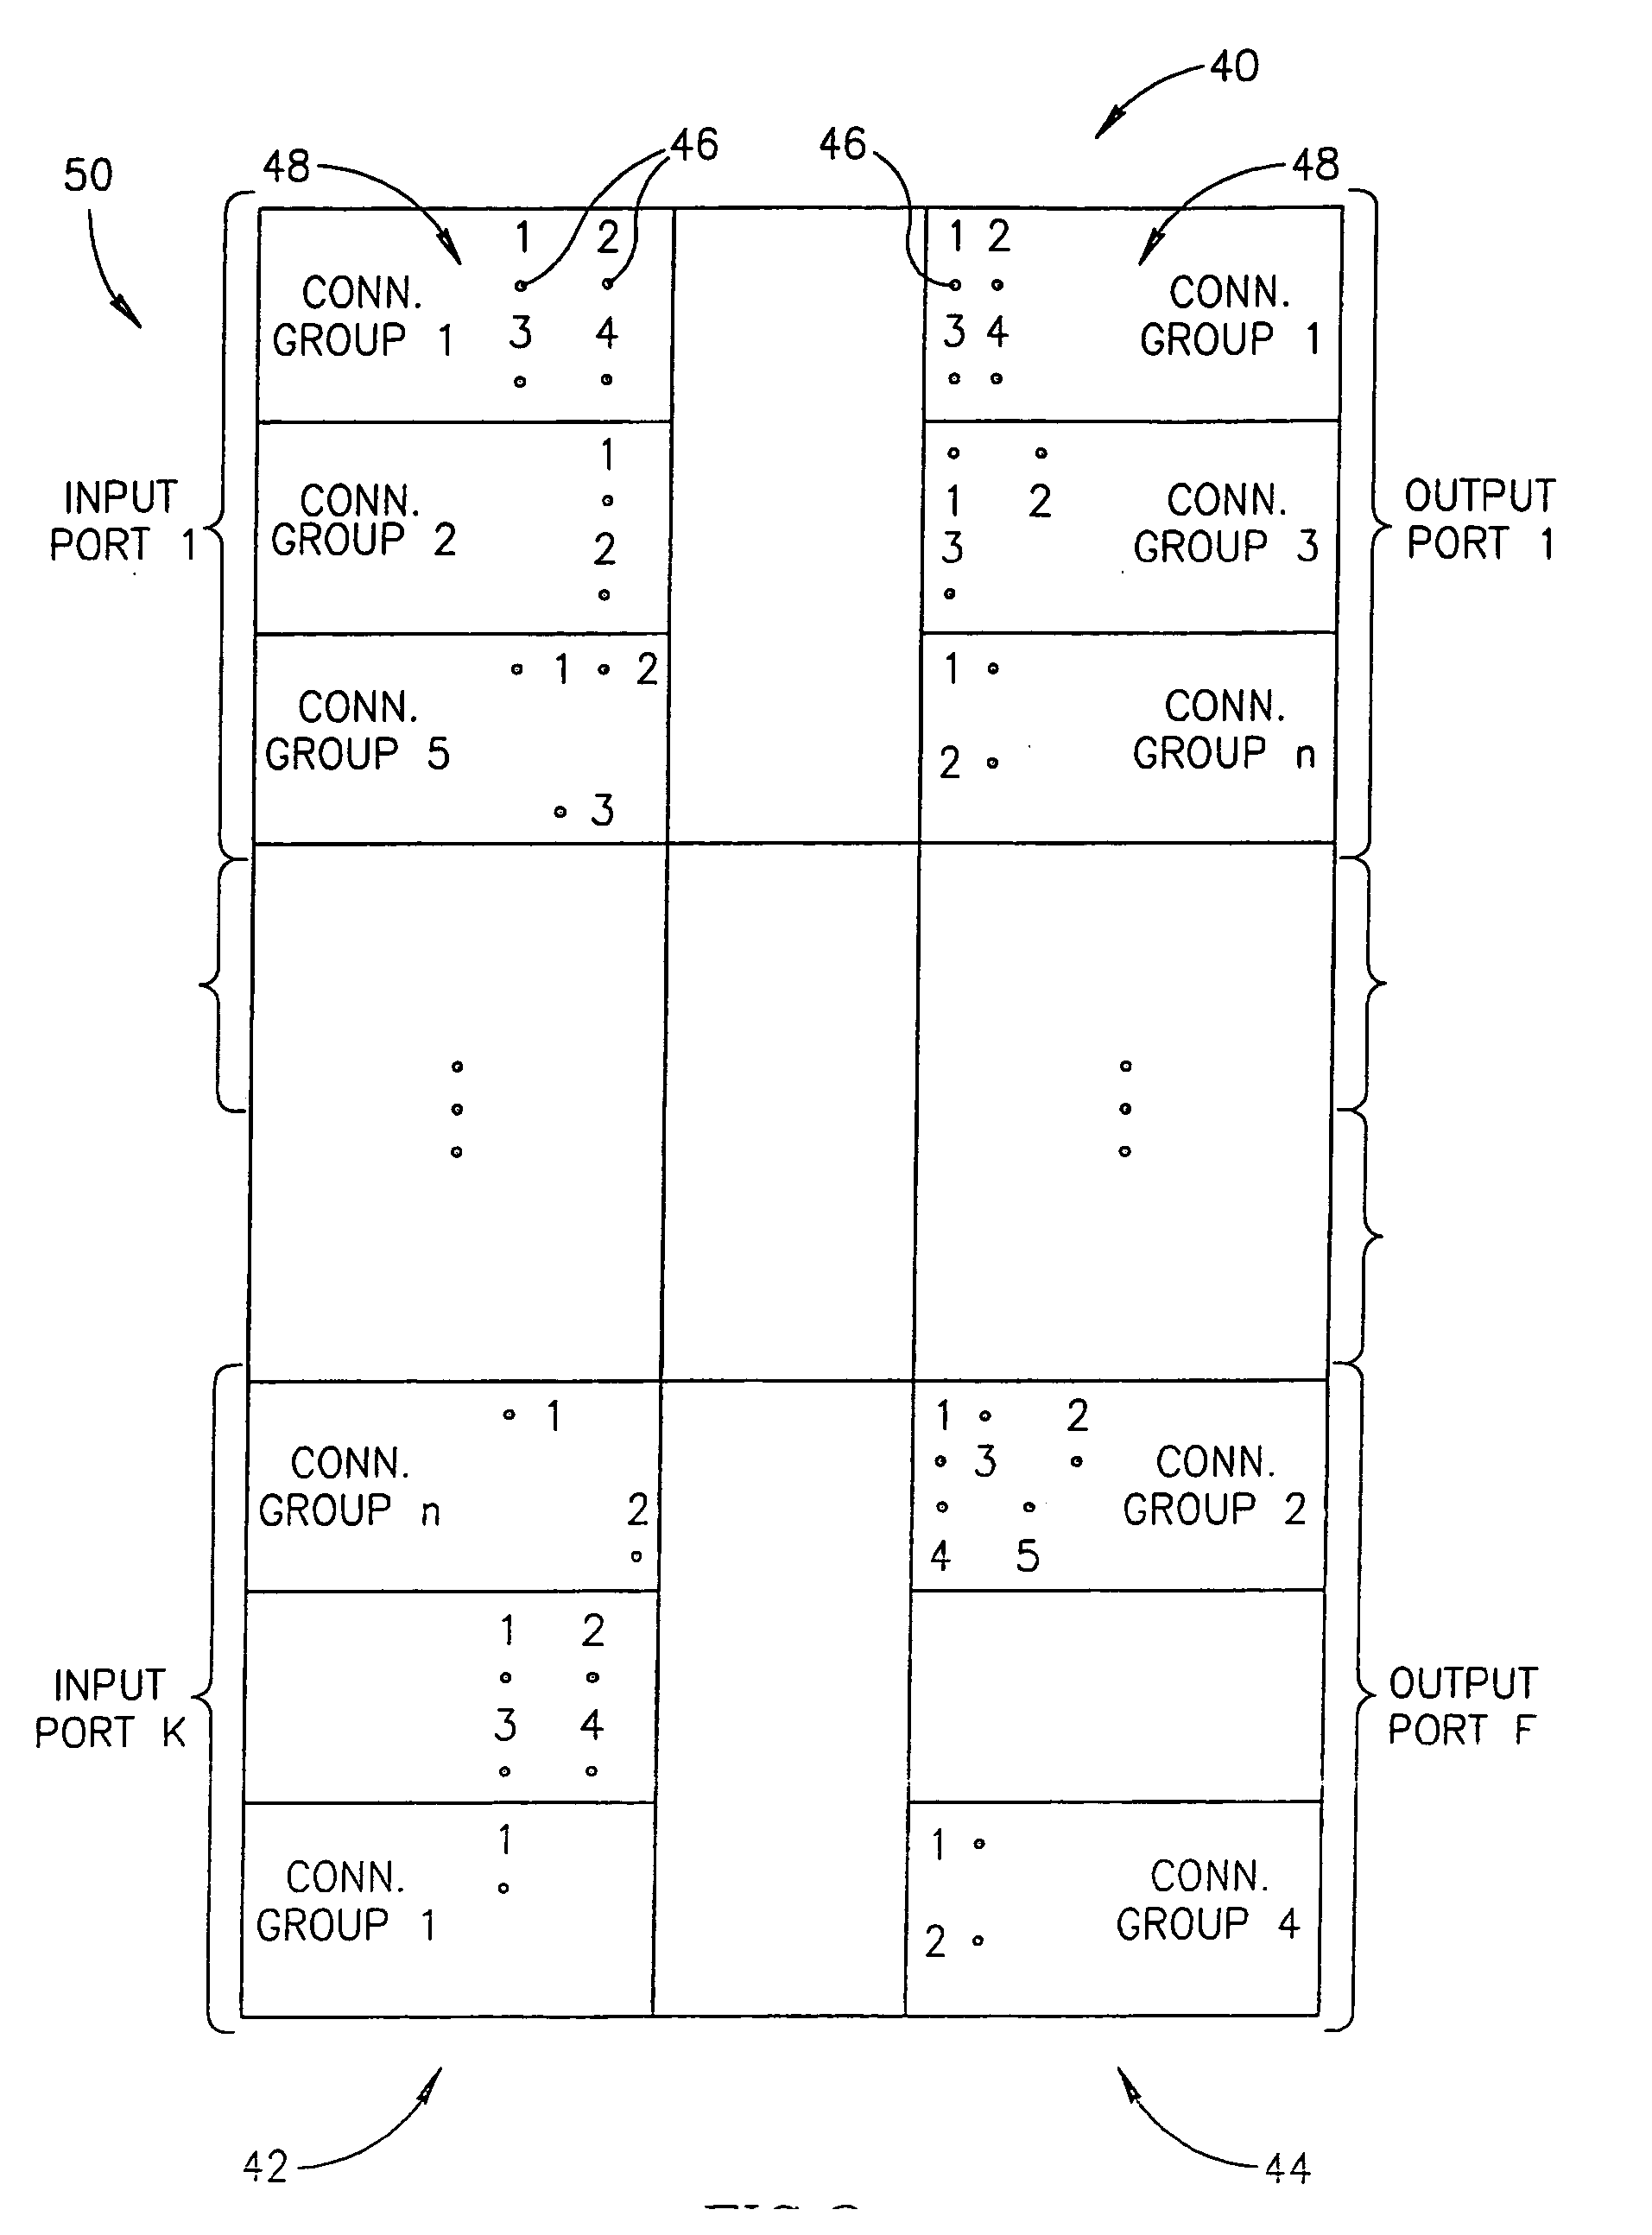 Technique of determining connectivity solutions for network elements